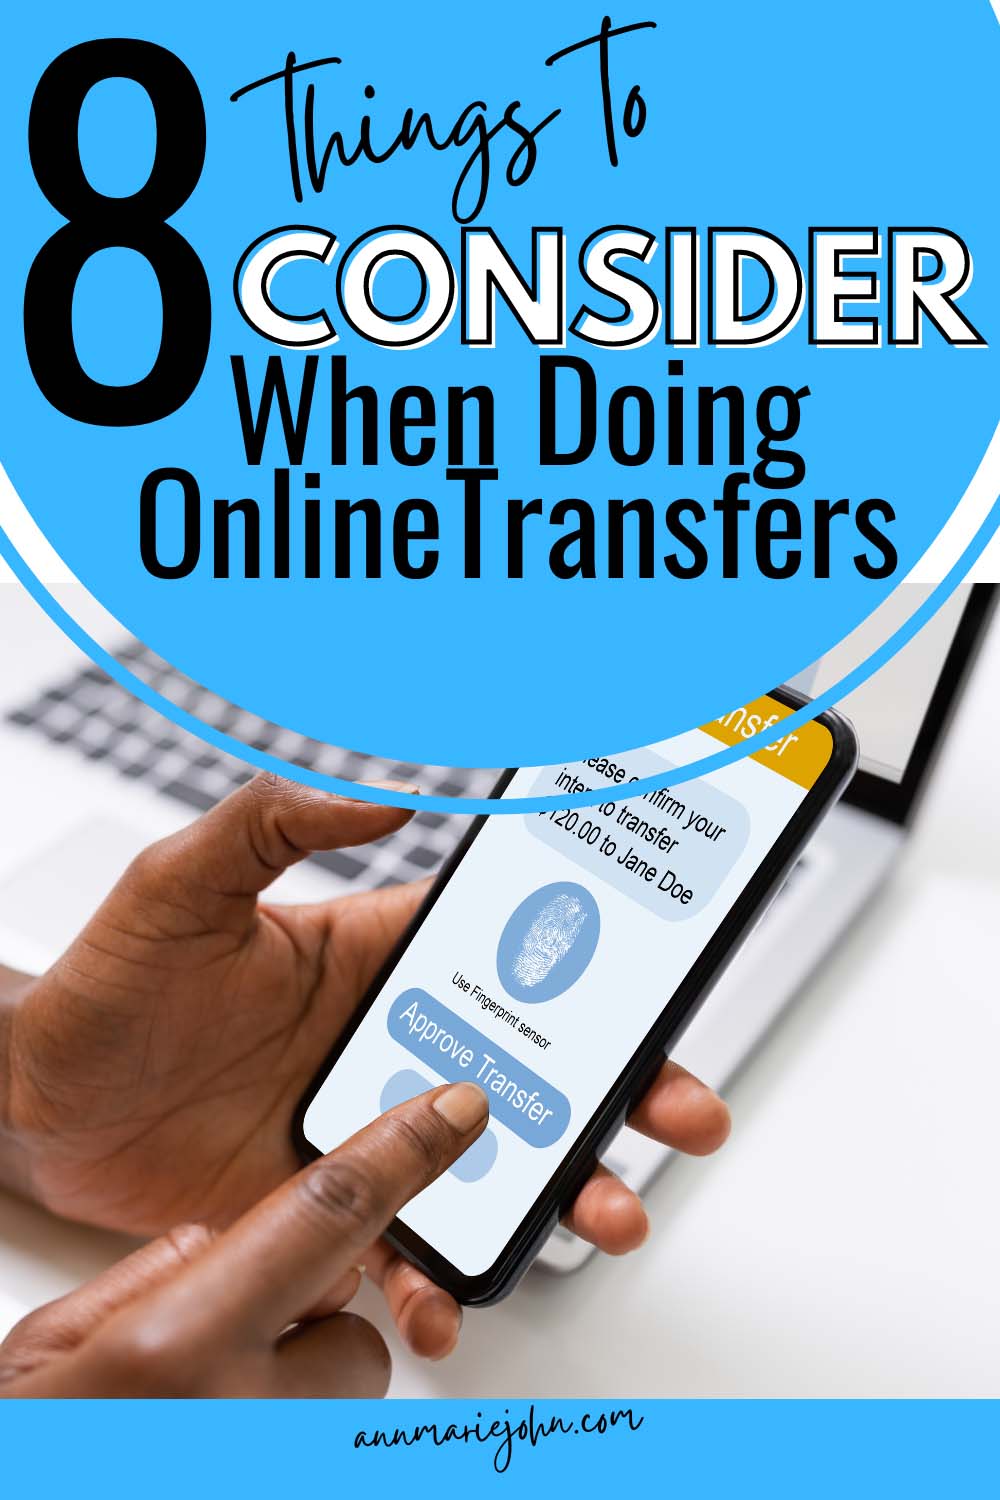 Things to Consider When Doing Online Transfers